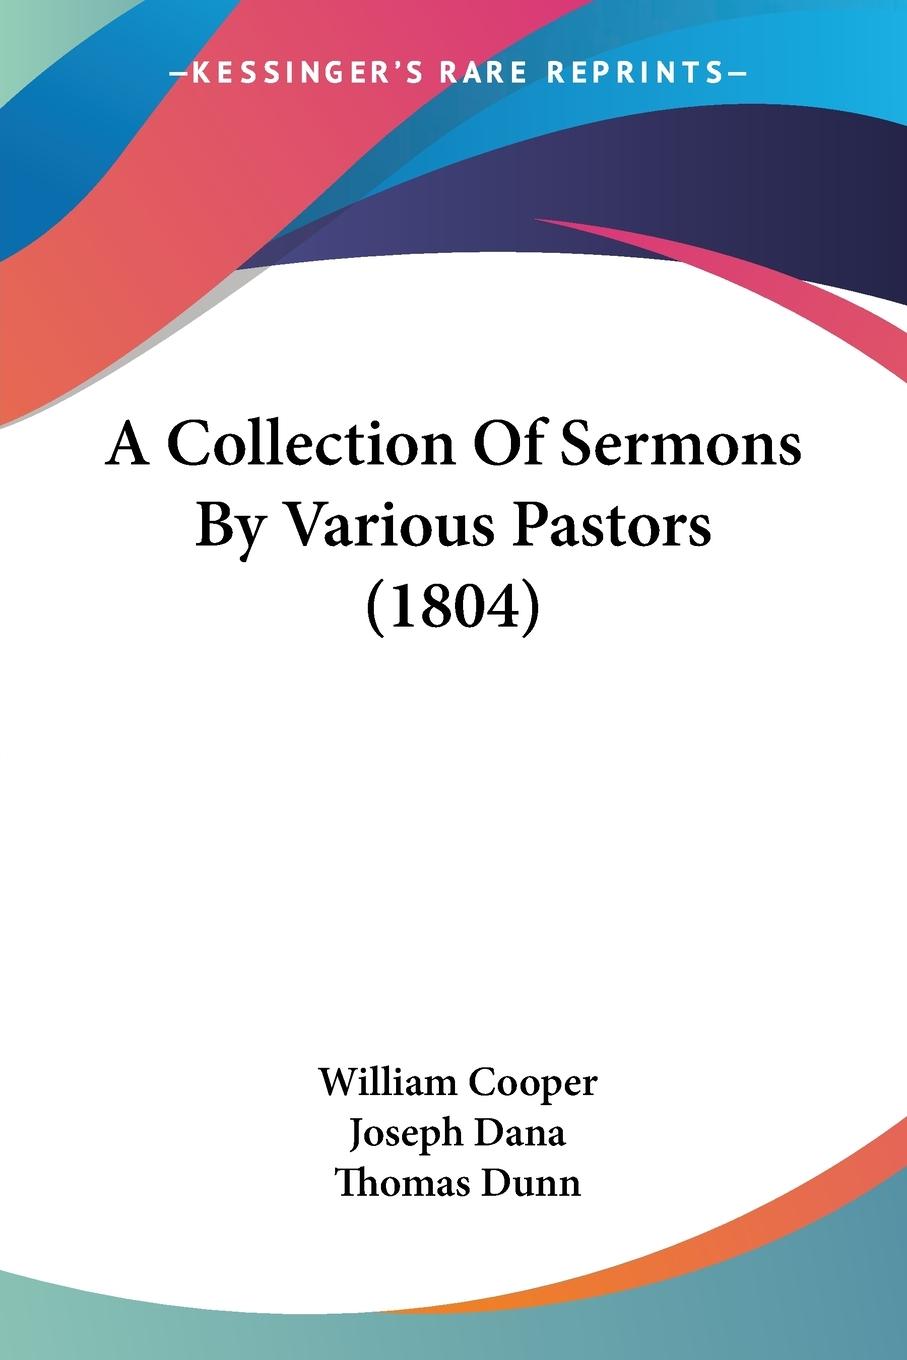 A Collection Of Sermons By Various Pastors (1804) - Cooper, William Dana, Joseph Dunn, Thomas